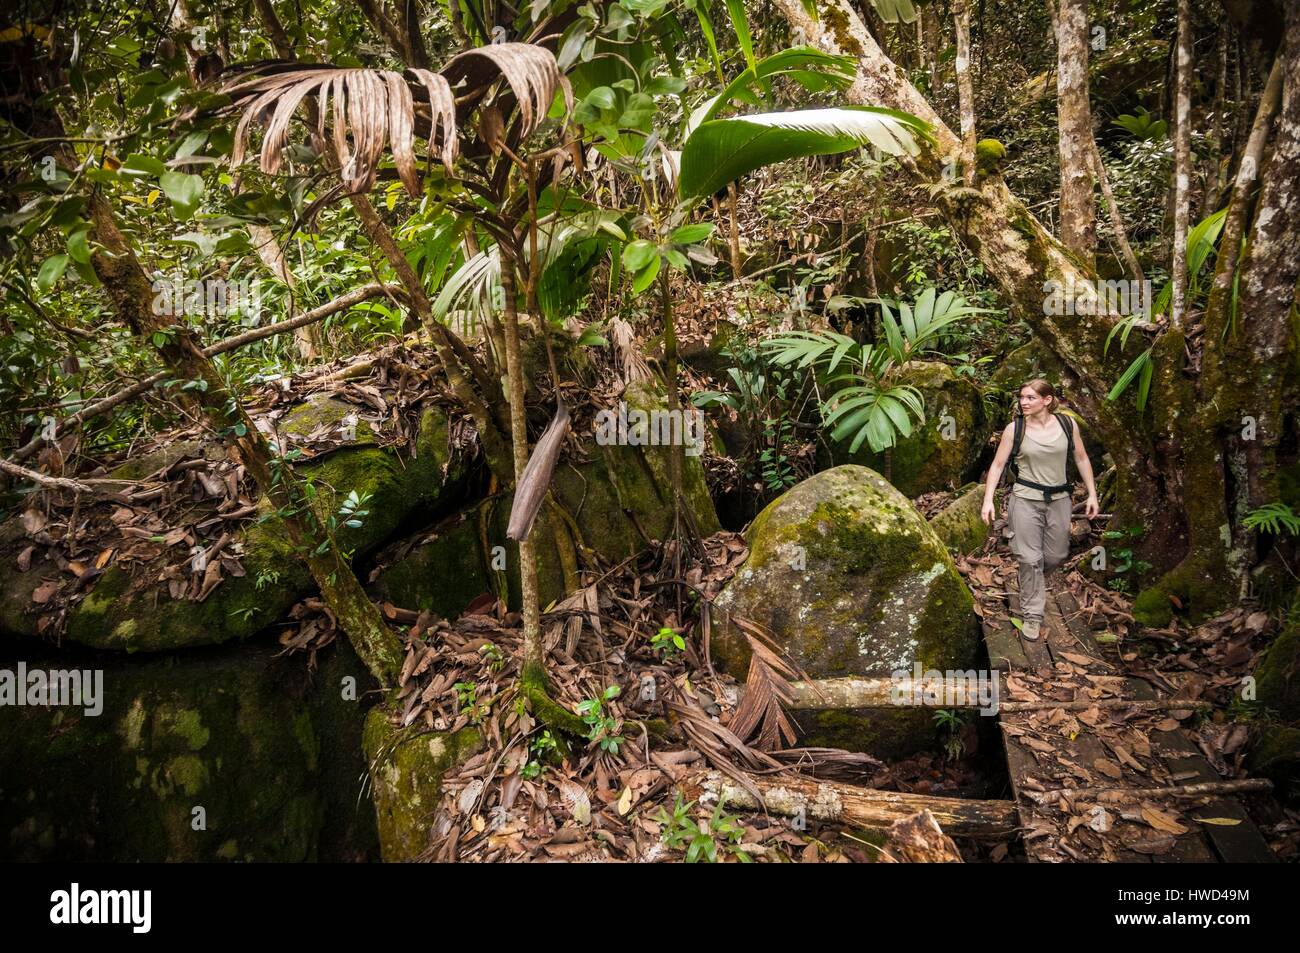 Seychelles, Mahe island, the Morne Seychellois National Park, hiking Copolia, gateway in the undergrowth of the rainforest dotted with granite blocks Stock Photo